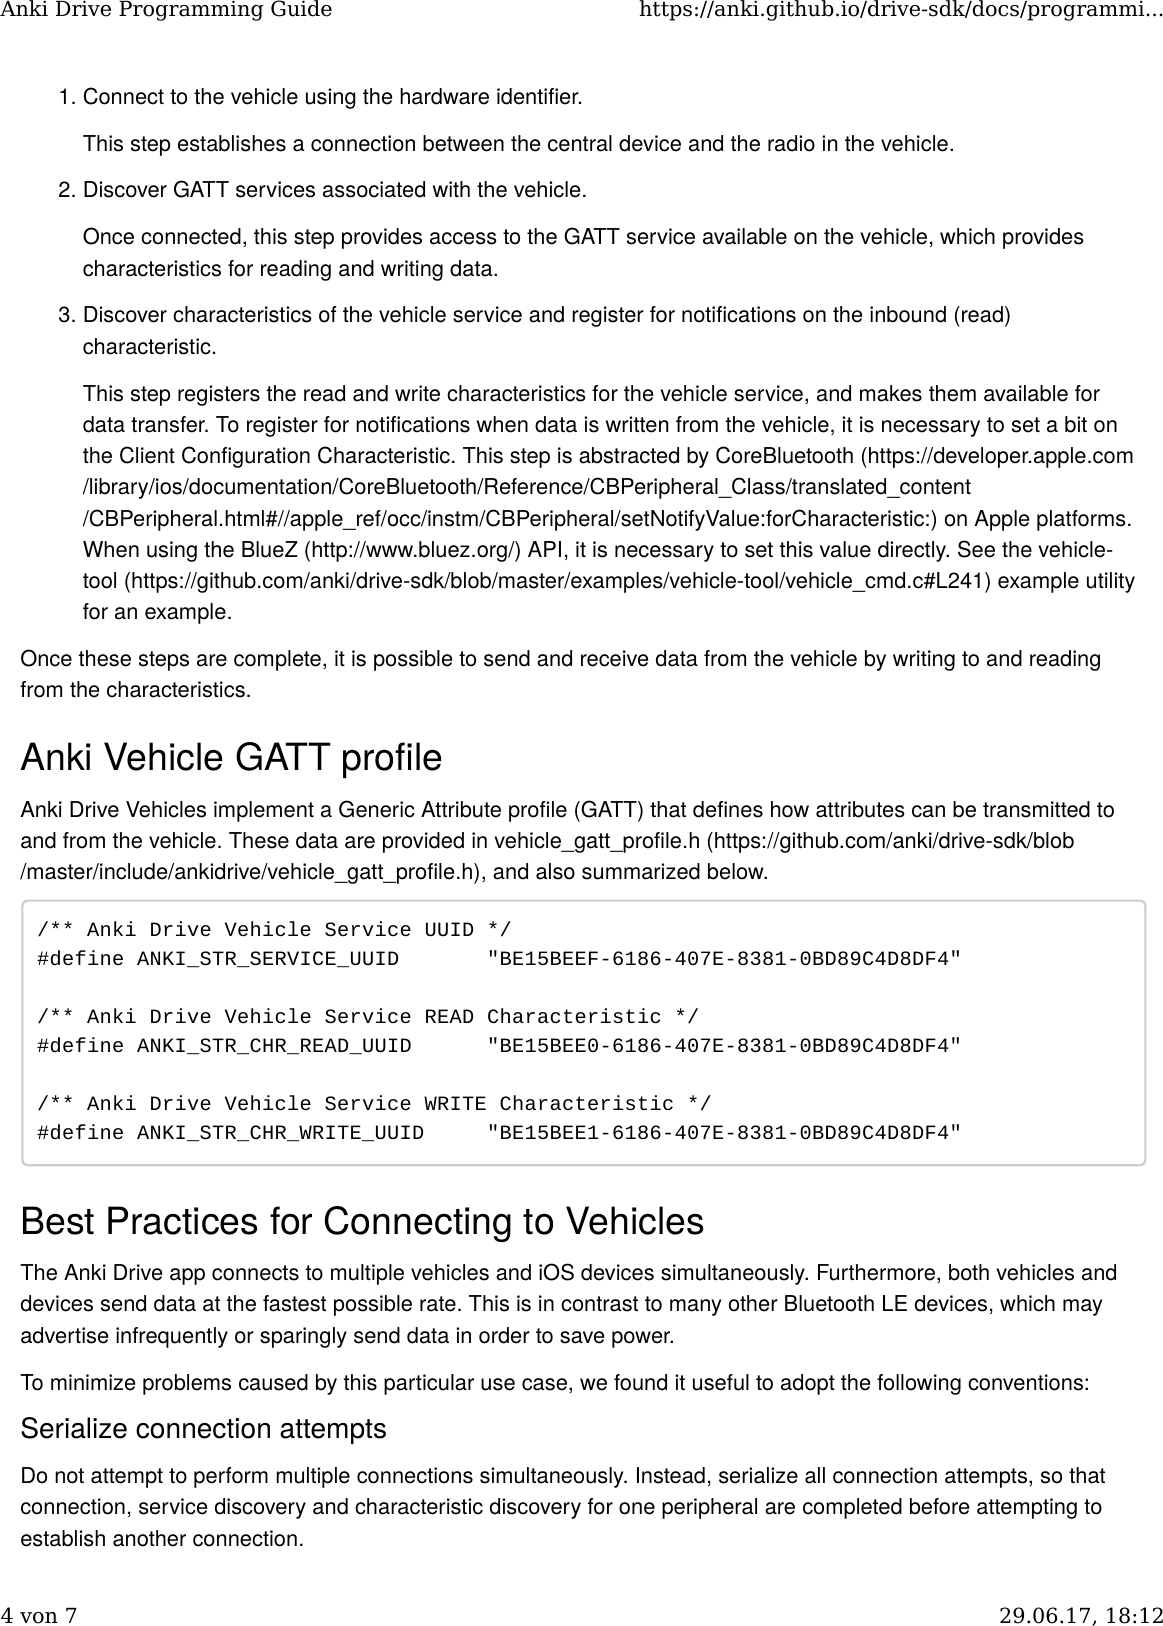 Page 4 of 7 - Anki-programming-guide